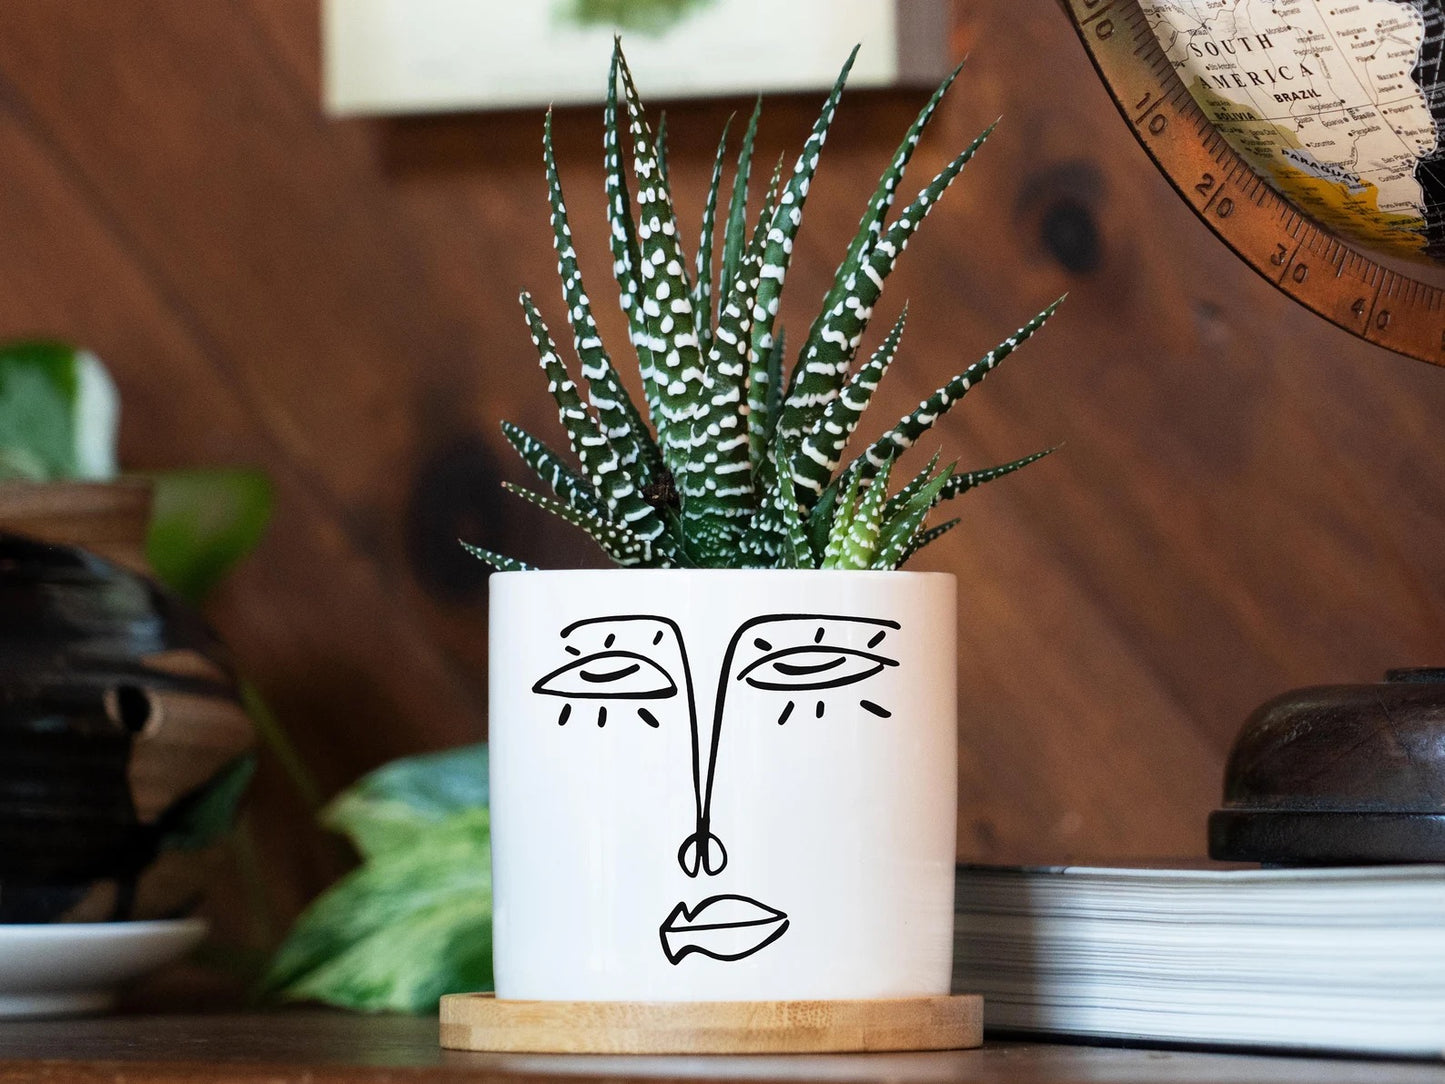 One Line Face Design - White Ceramic Planter - 3" With Bamboo Tray